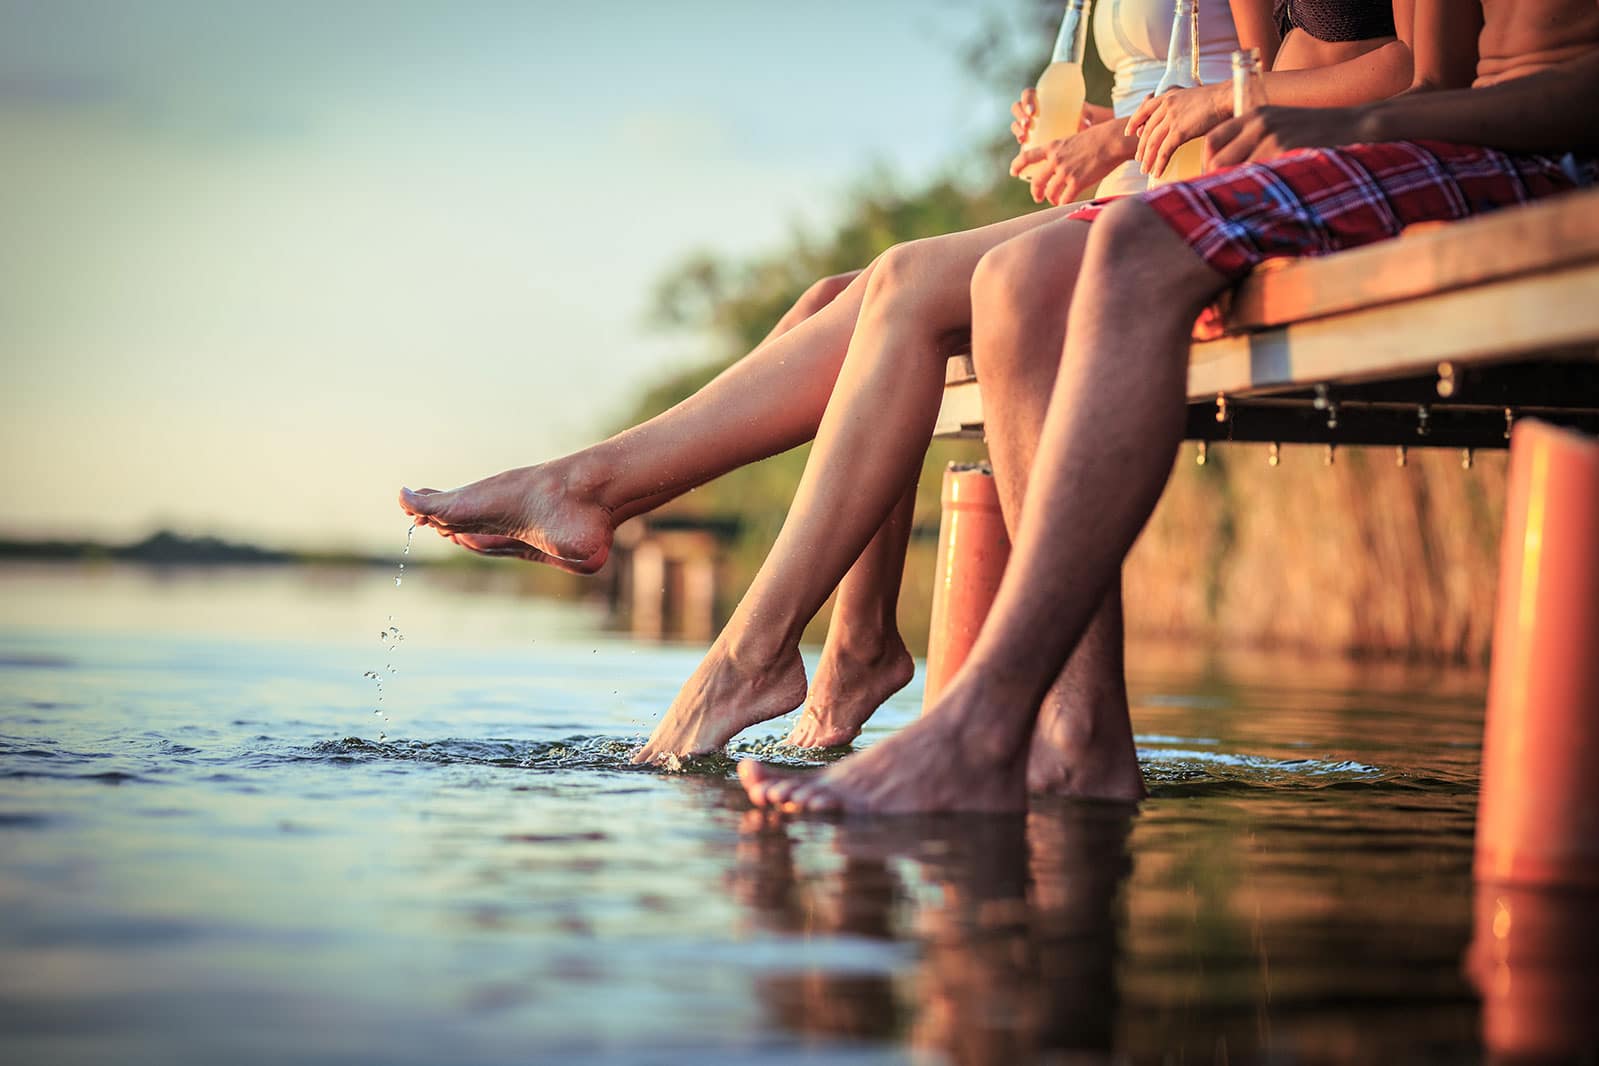 Shot of people's legs sitting on a dock with feet in water.